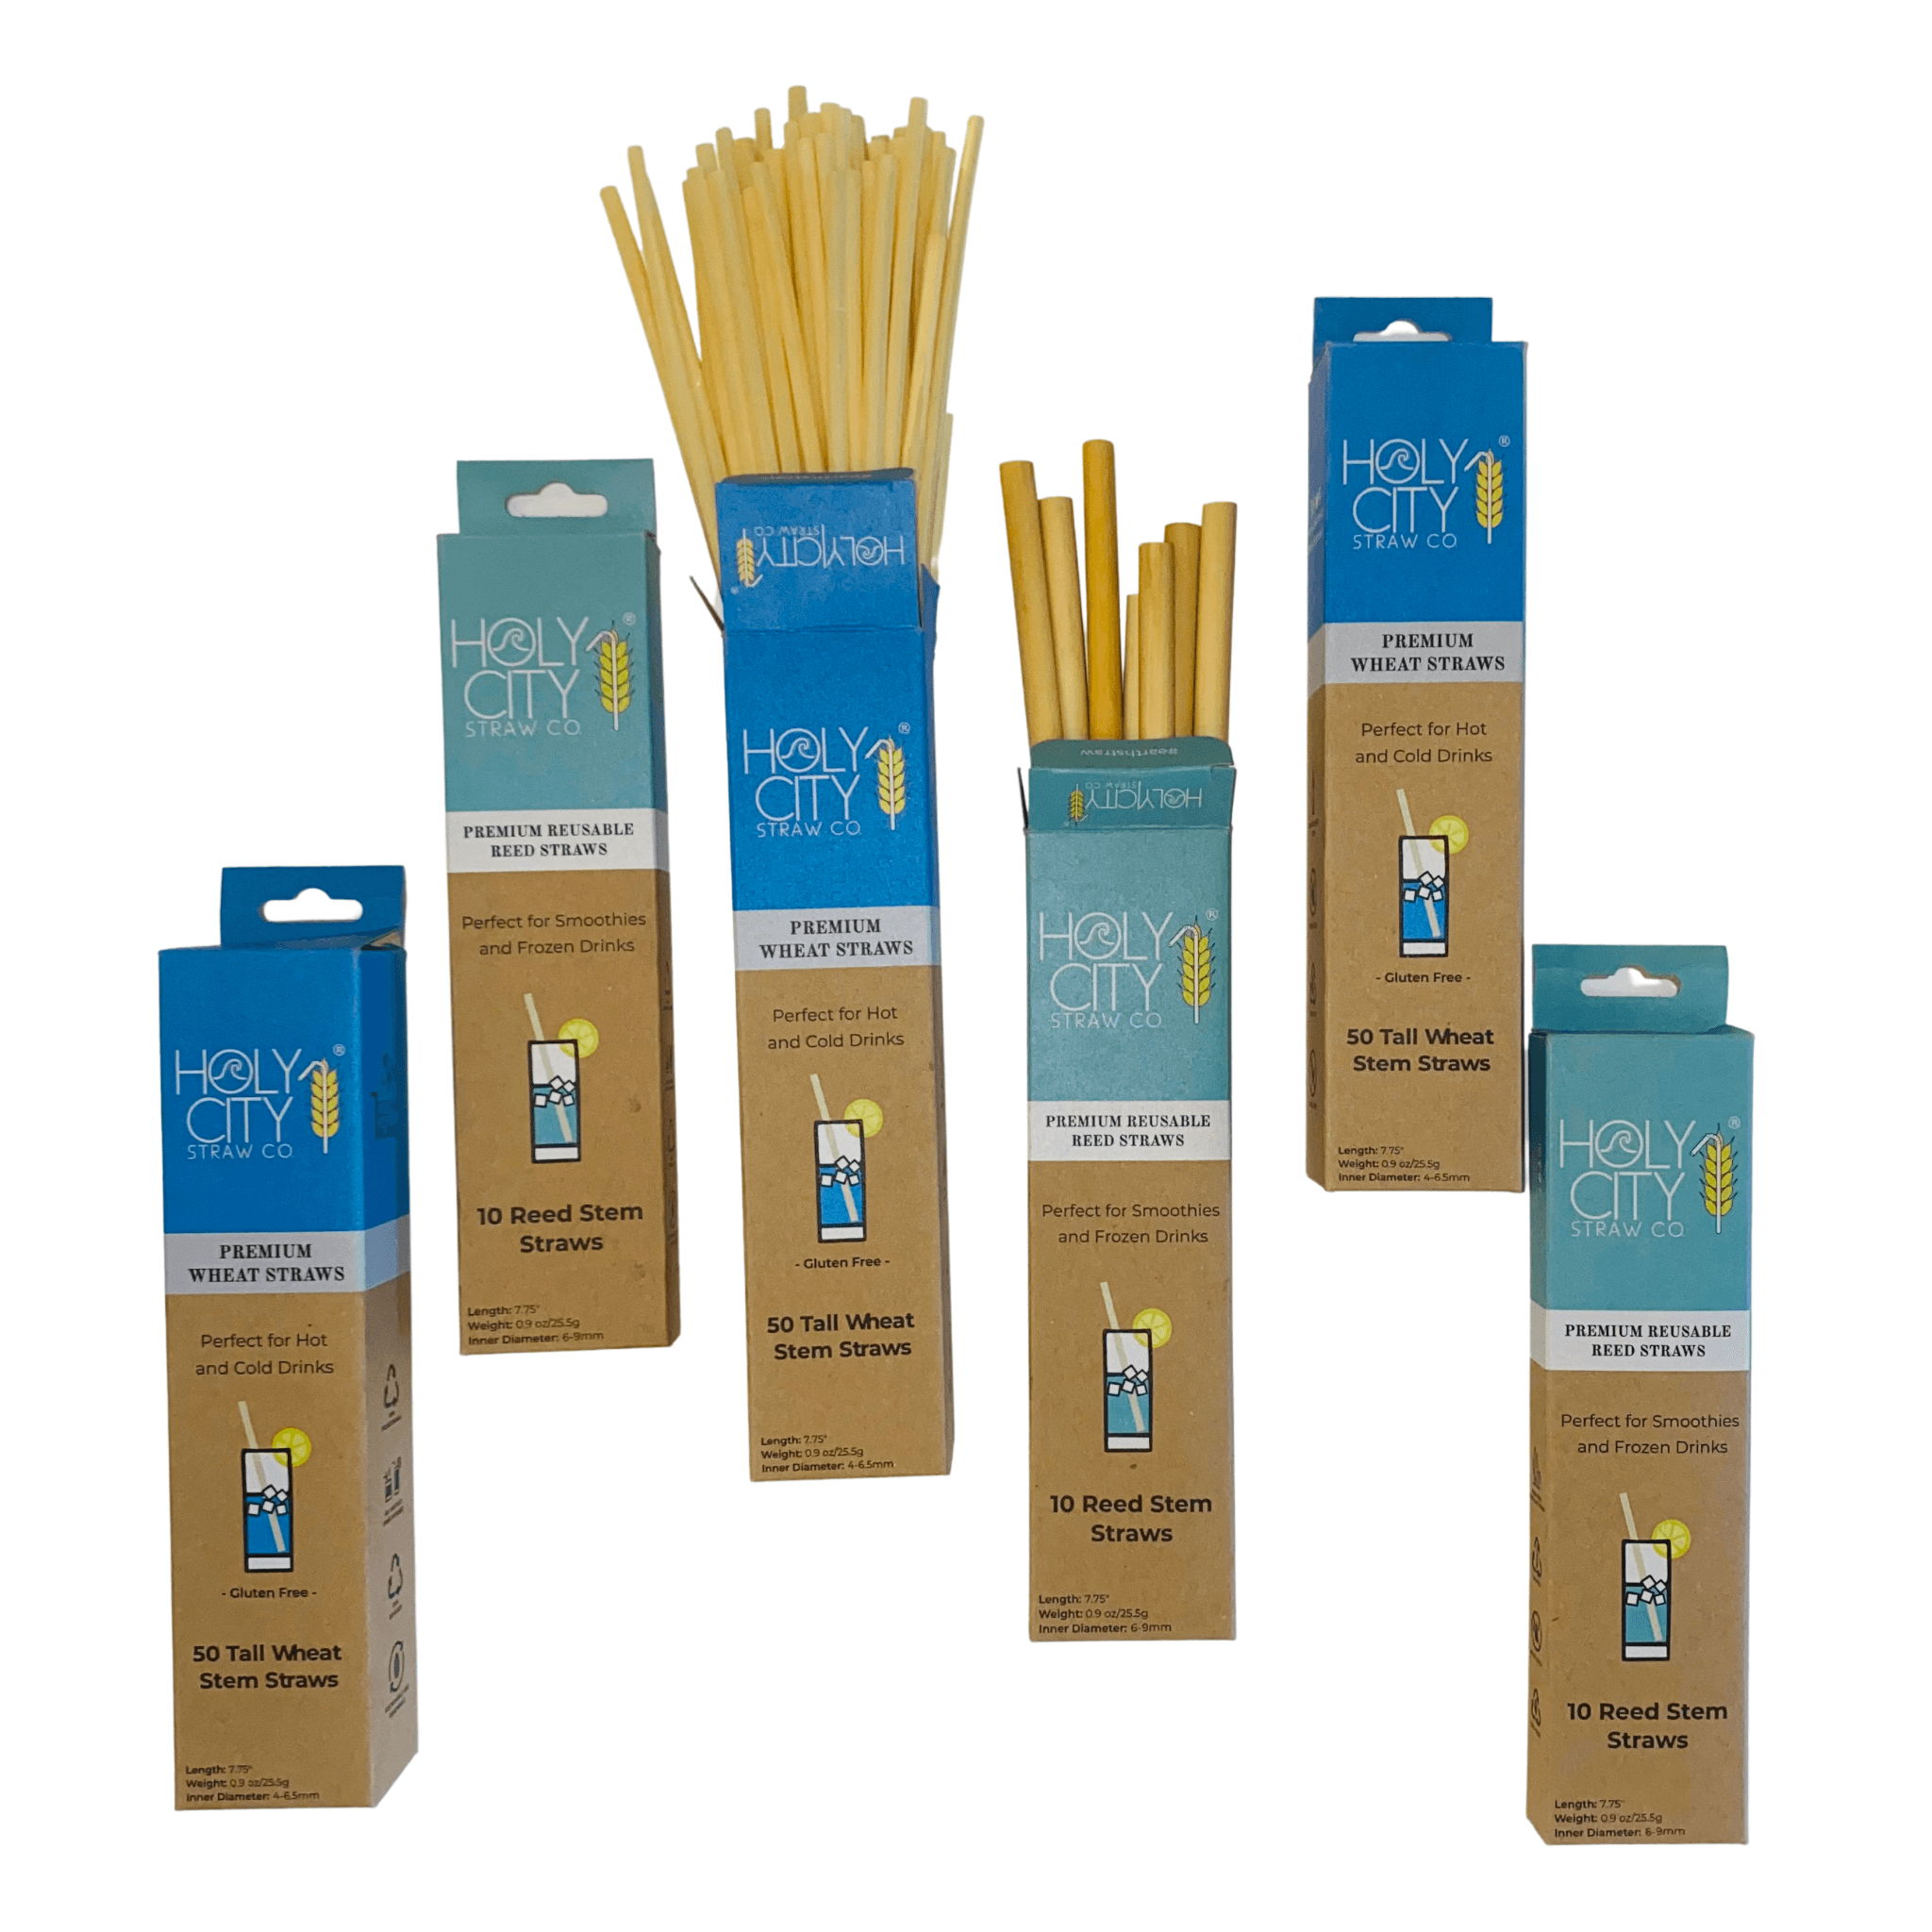 Wheat and Reed Straw Bundle - 6 Pack.